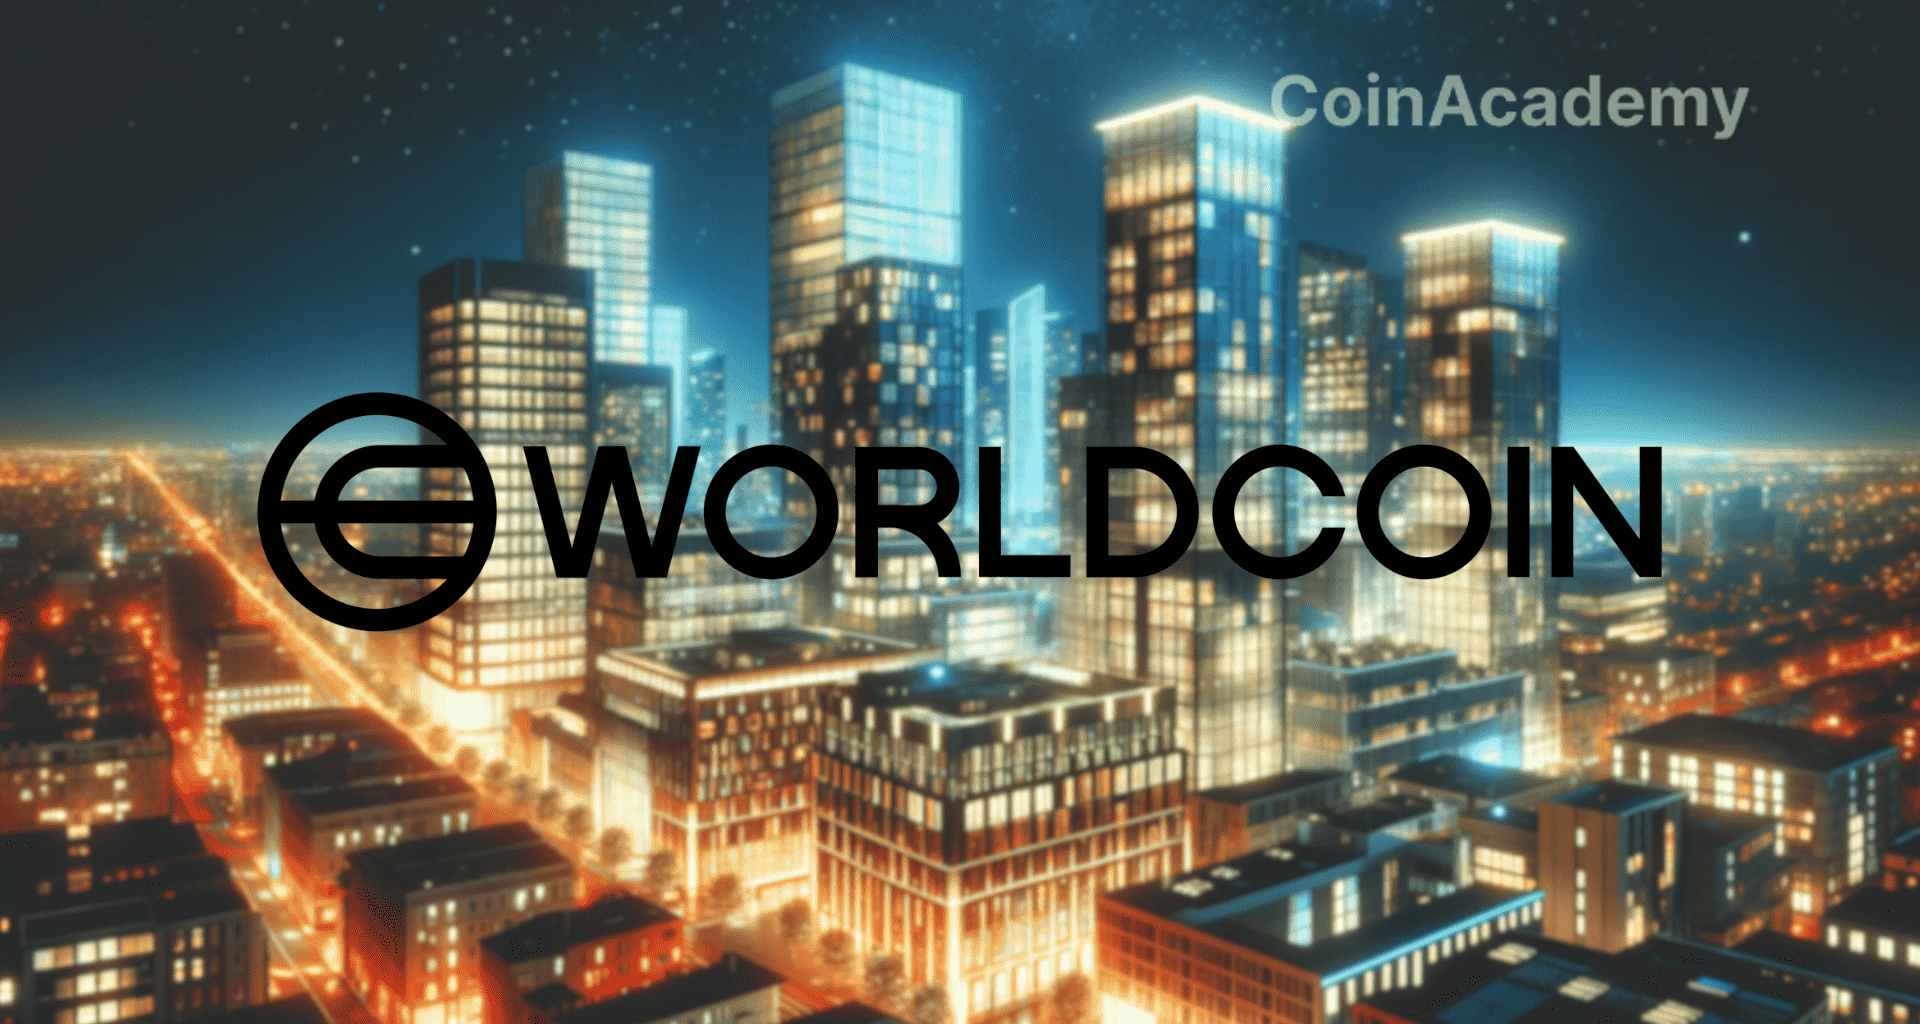 worldcoin subventions 5 millions